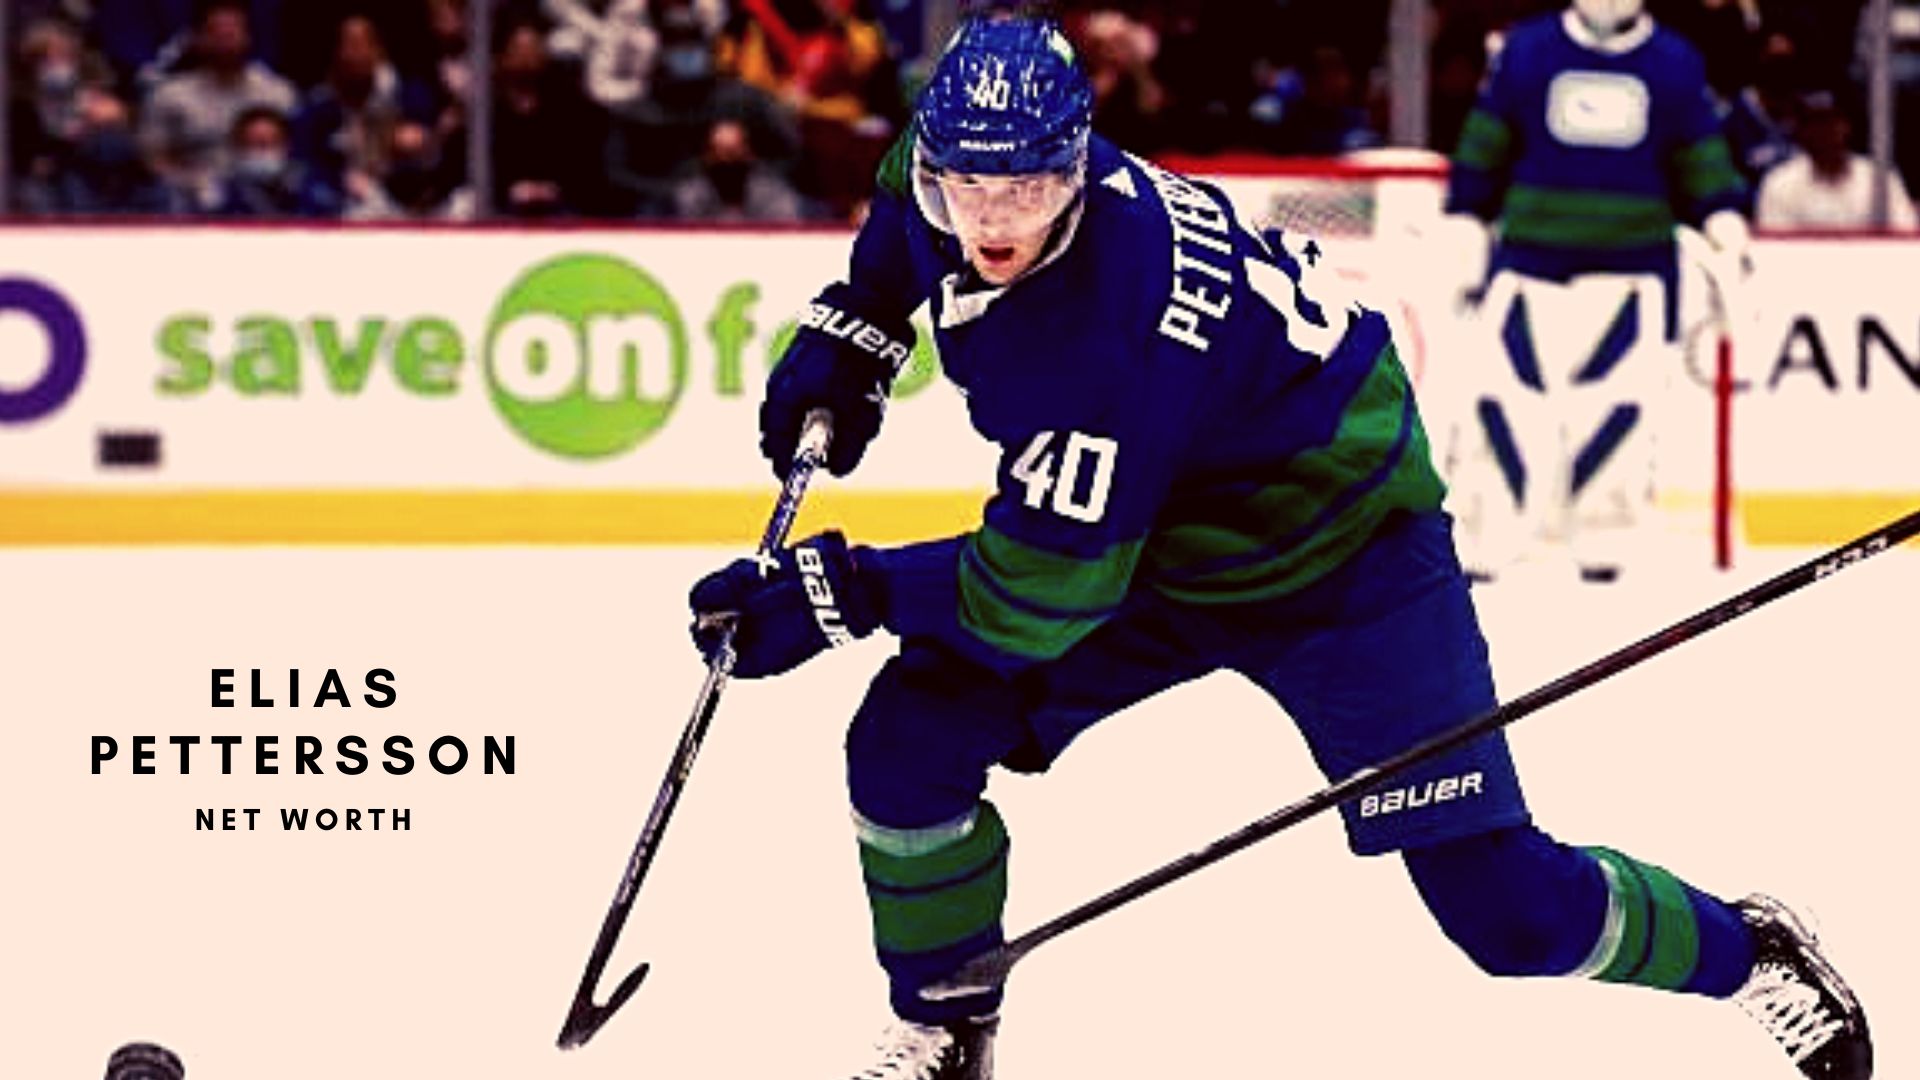 Elias Pettersson Net Worth, Contract Details, Salary and Bio